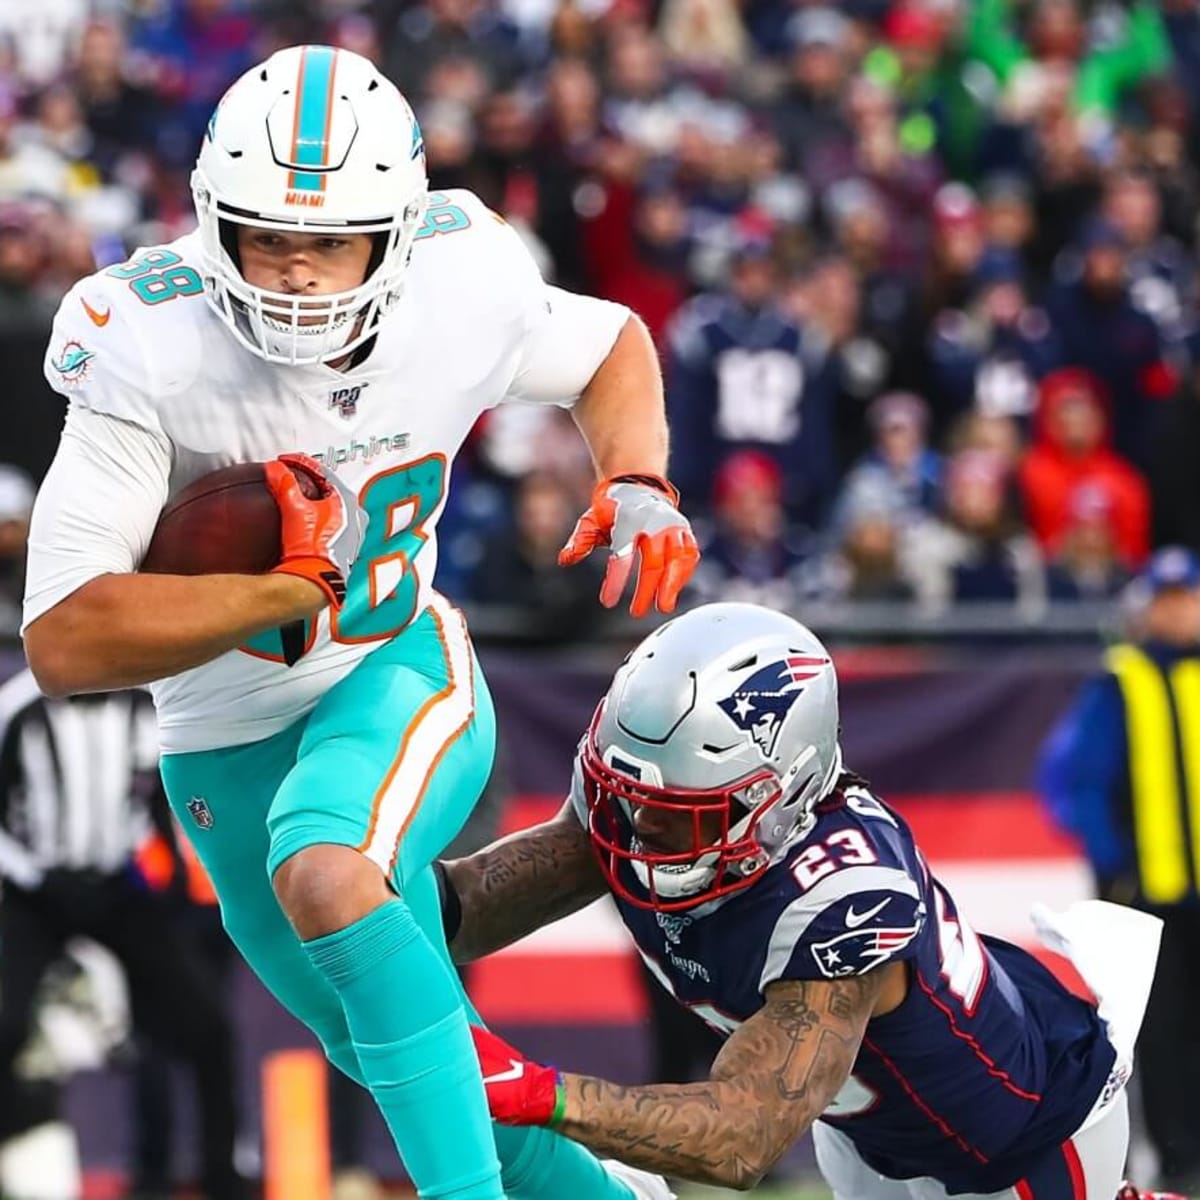 NFL free agency: Patriots sign ex-Dolphins TE Mike Gesicki - Pats